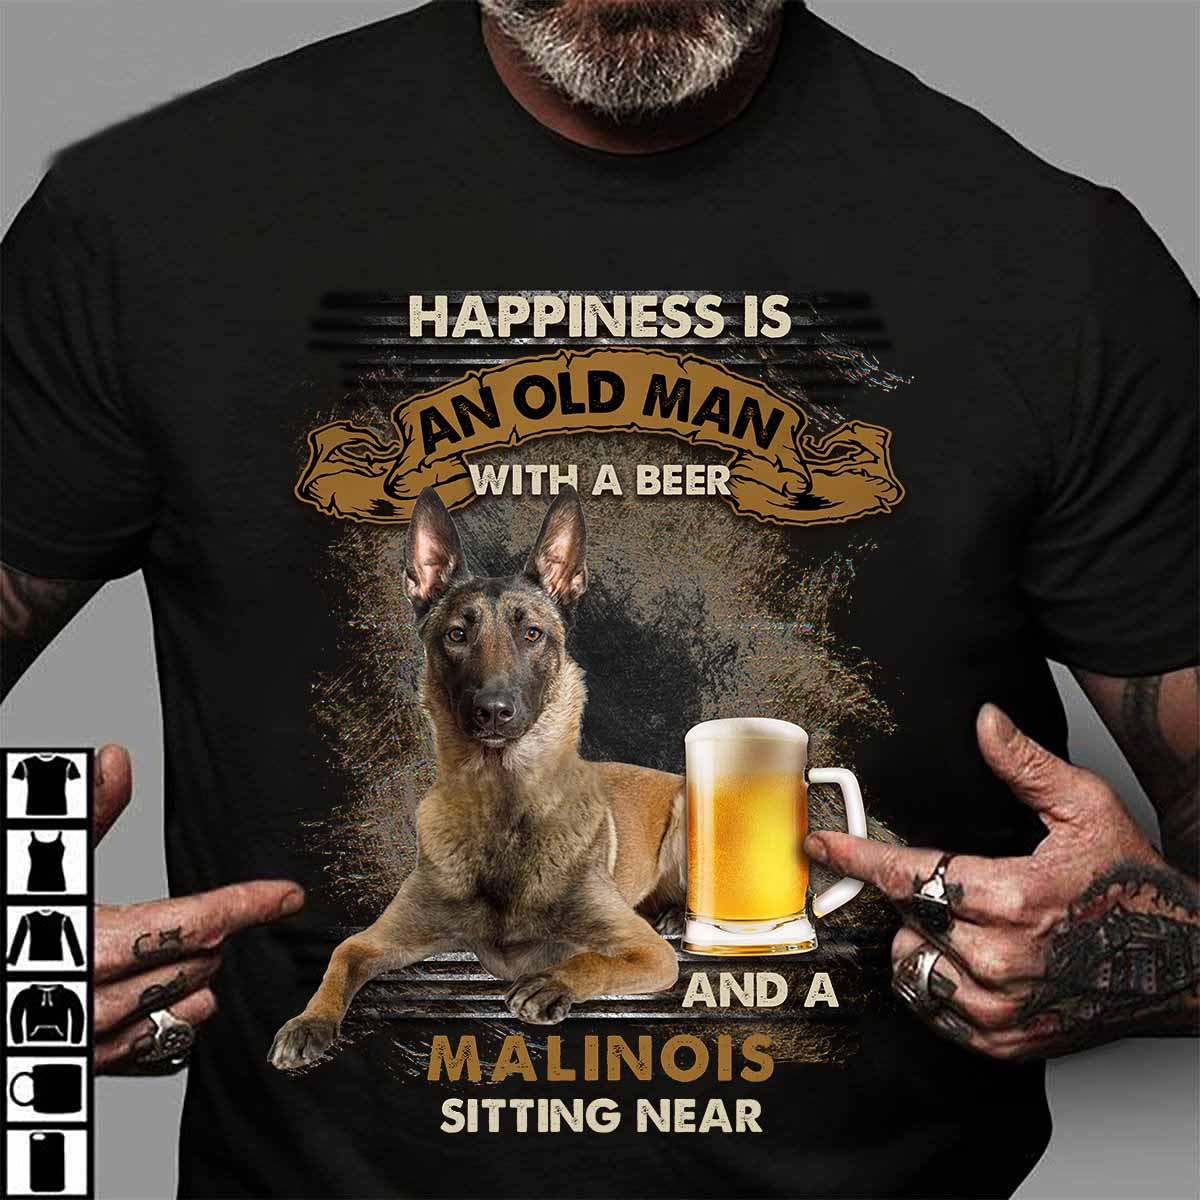 Happiness is an old man with a beer and a Malinois sitting near - Malinois dog